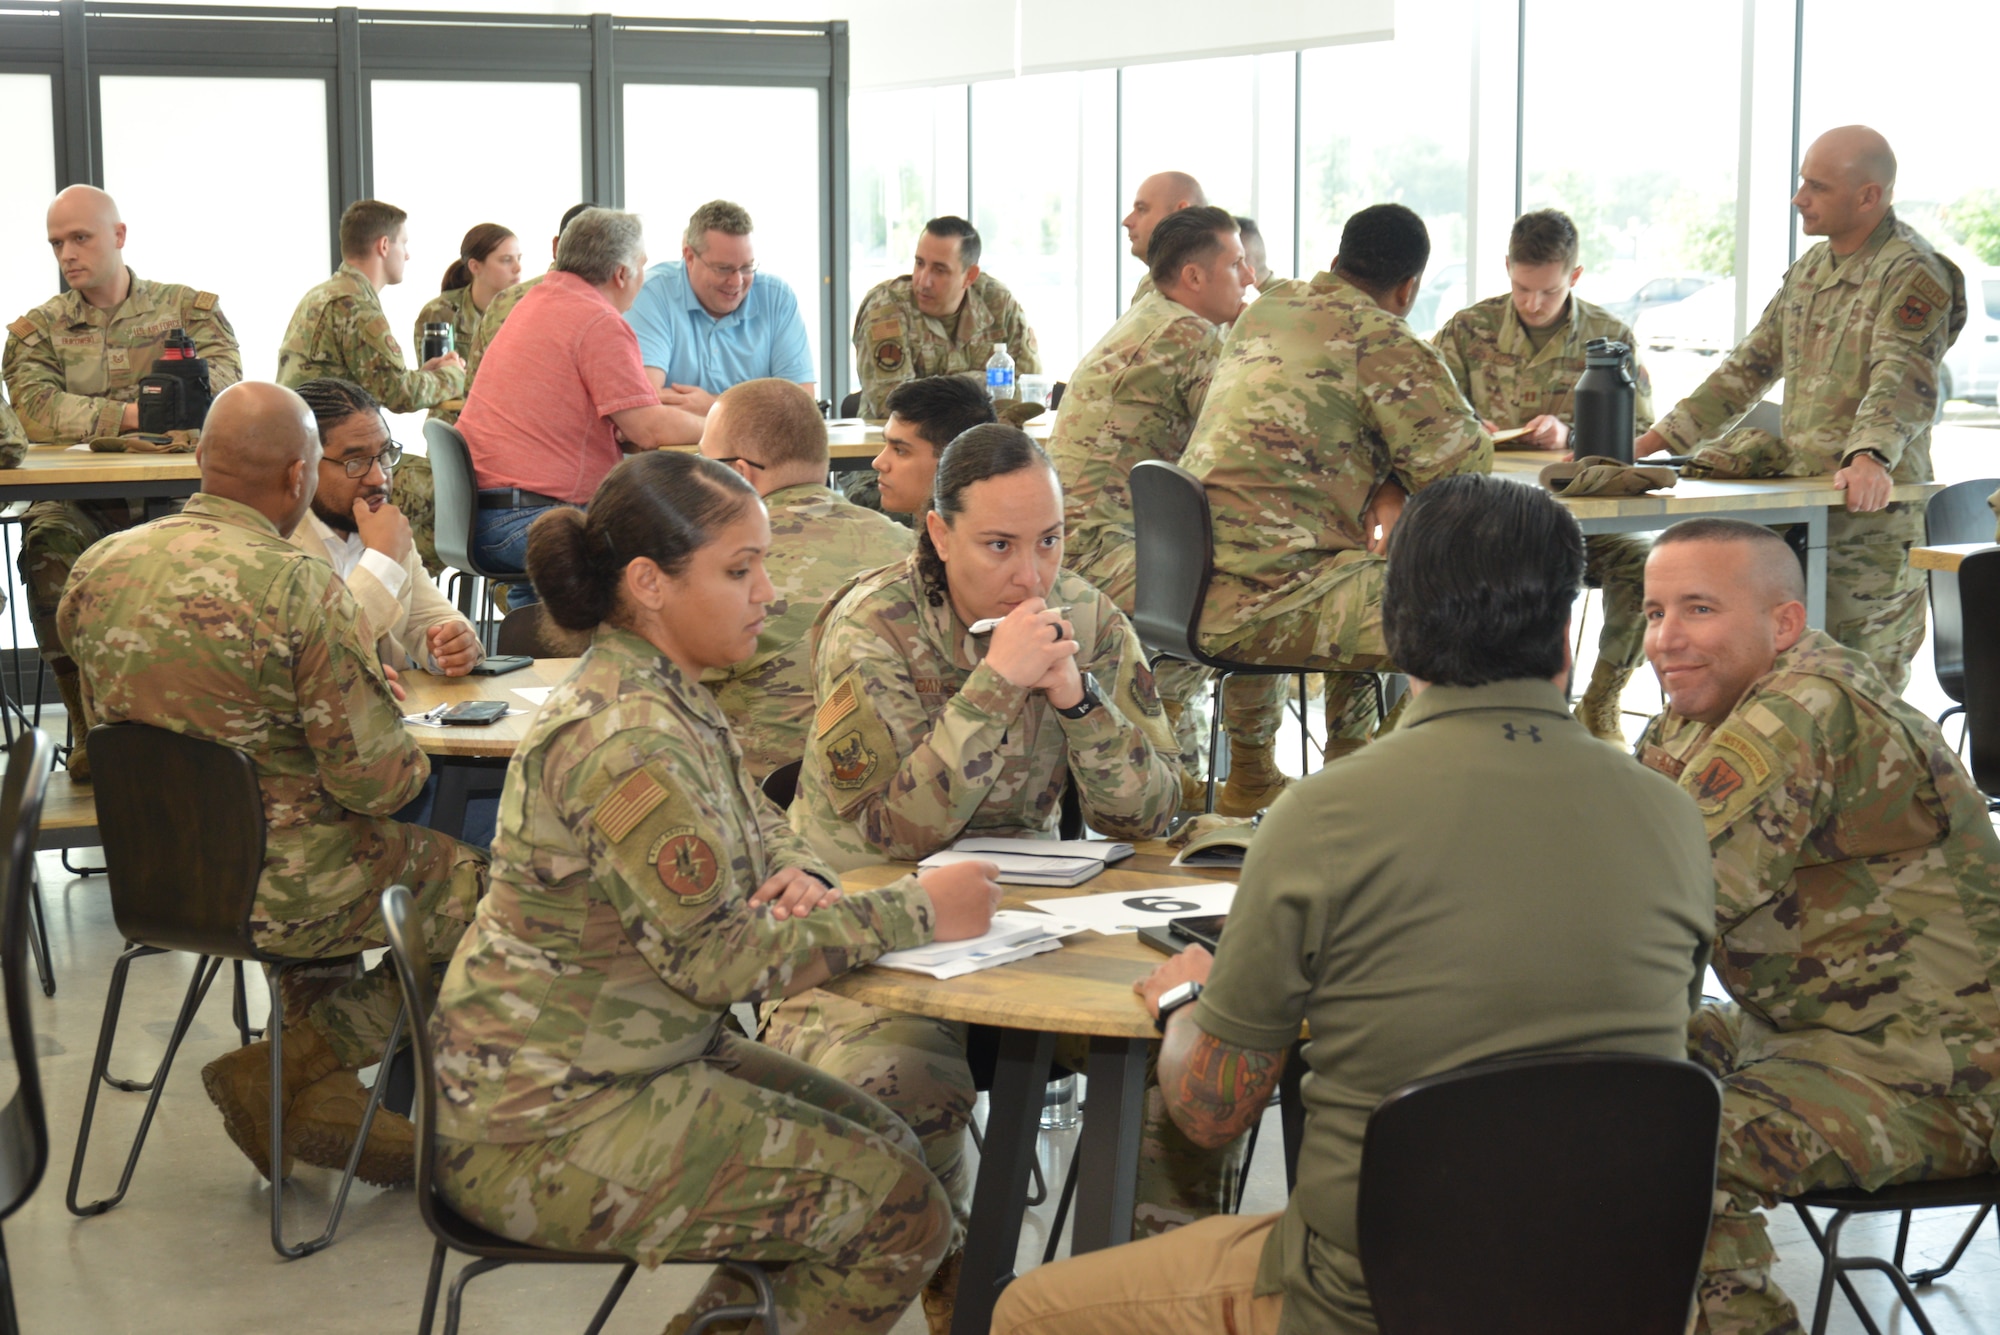 Thirteen mentors discussed several themes including personal growth, situational advice, professional development as well describing their motivations to more than 60 junior enlisted and officer attendees.